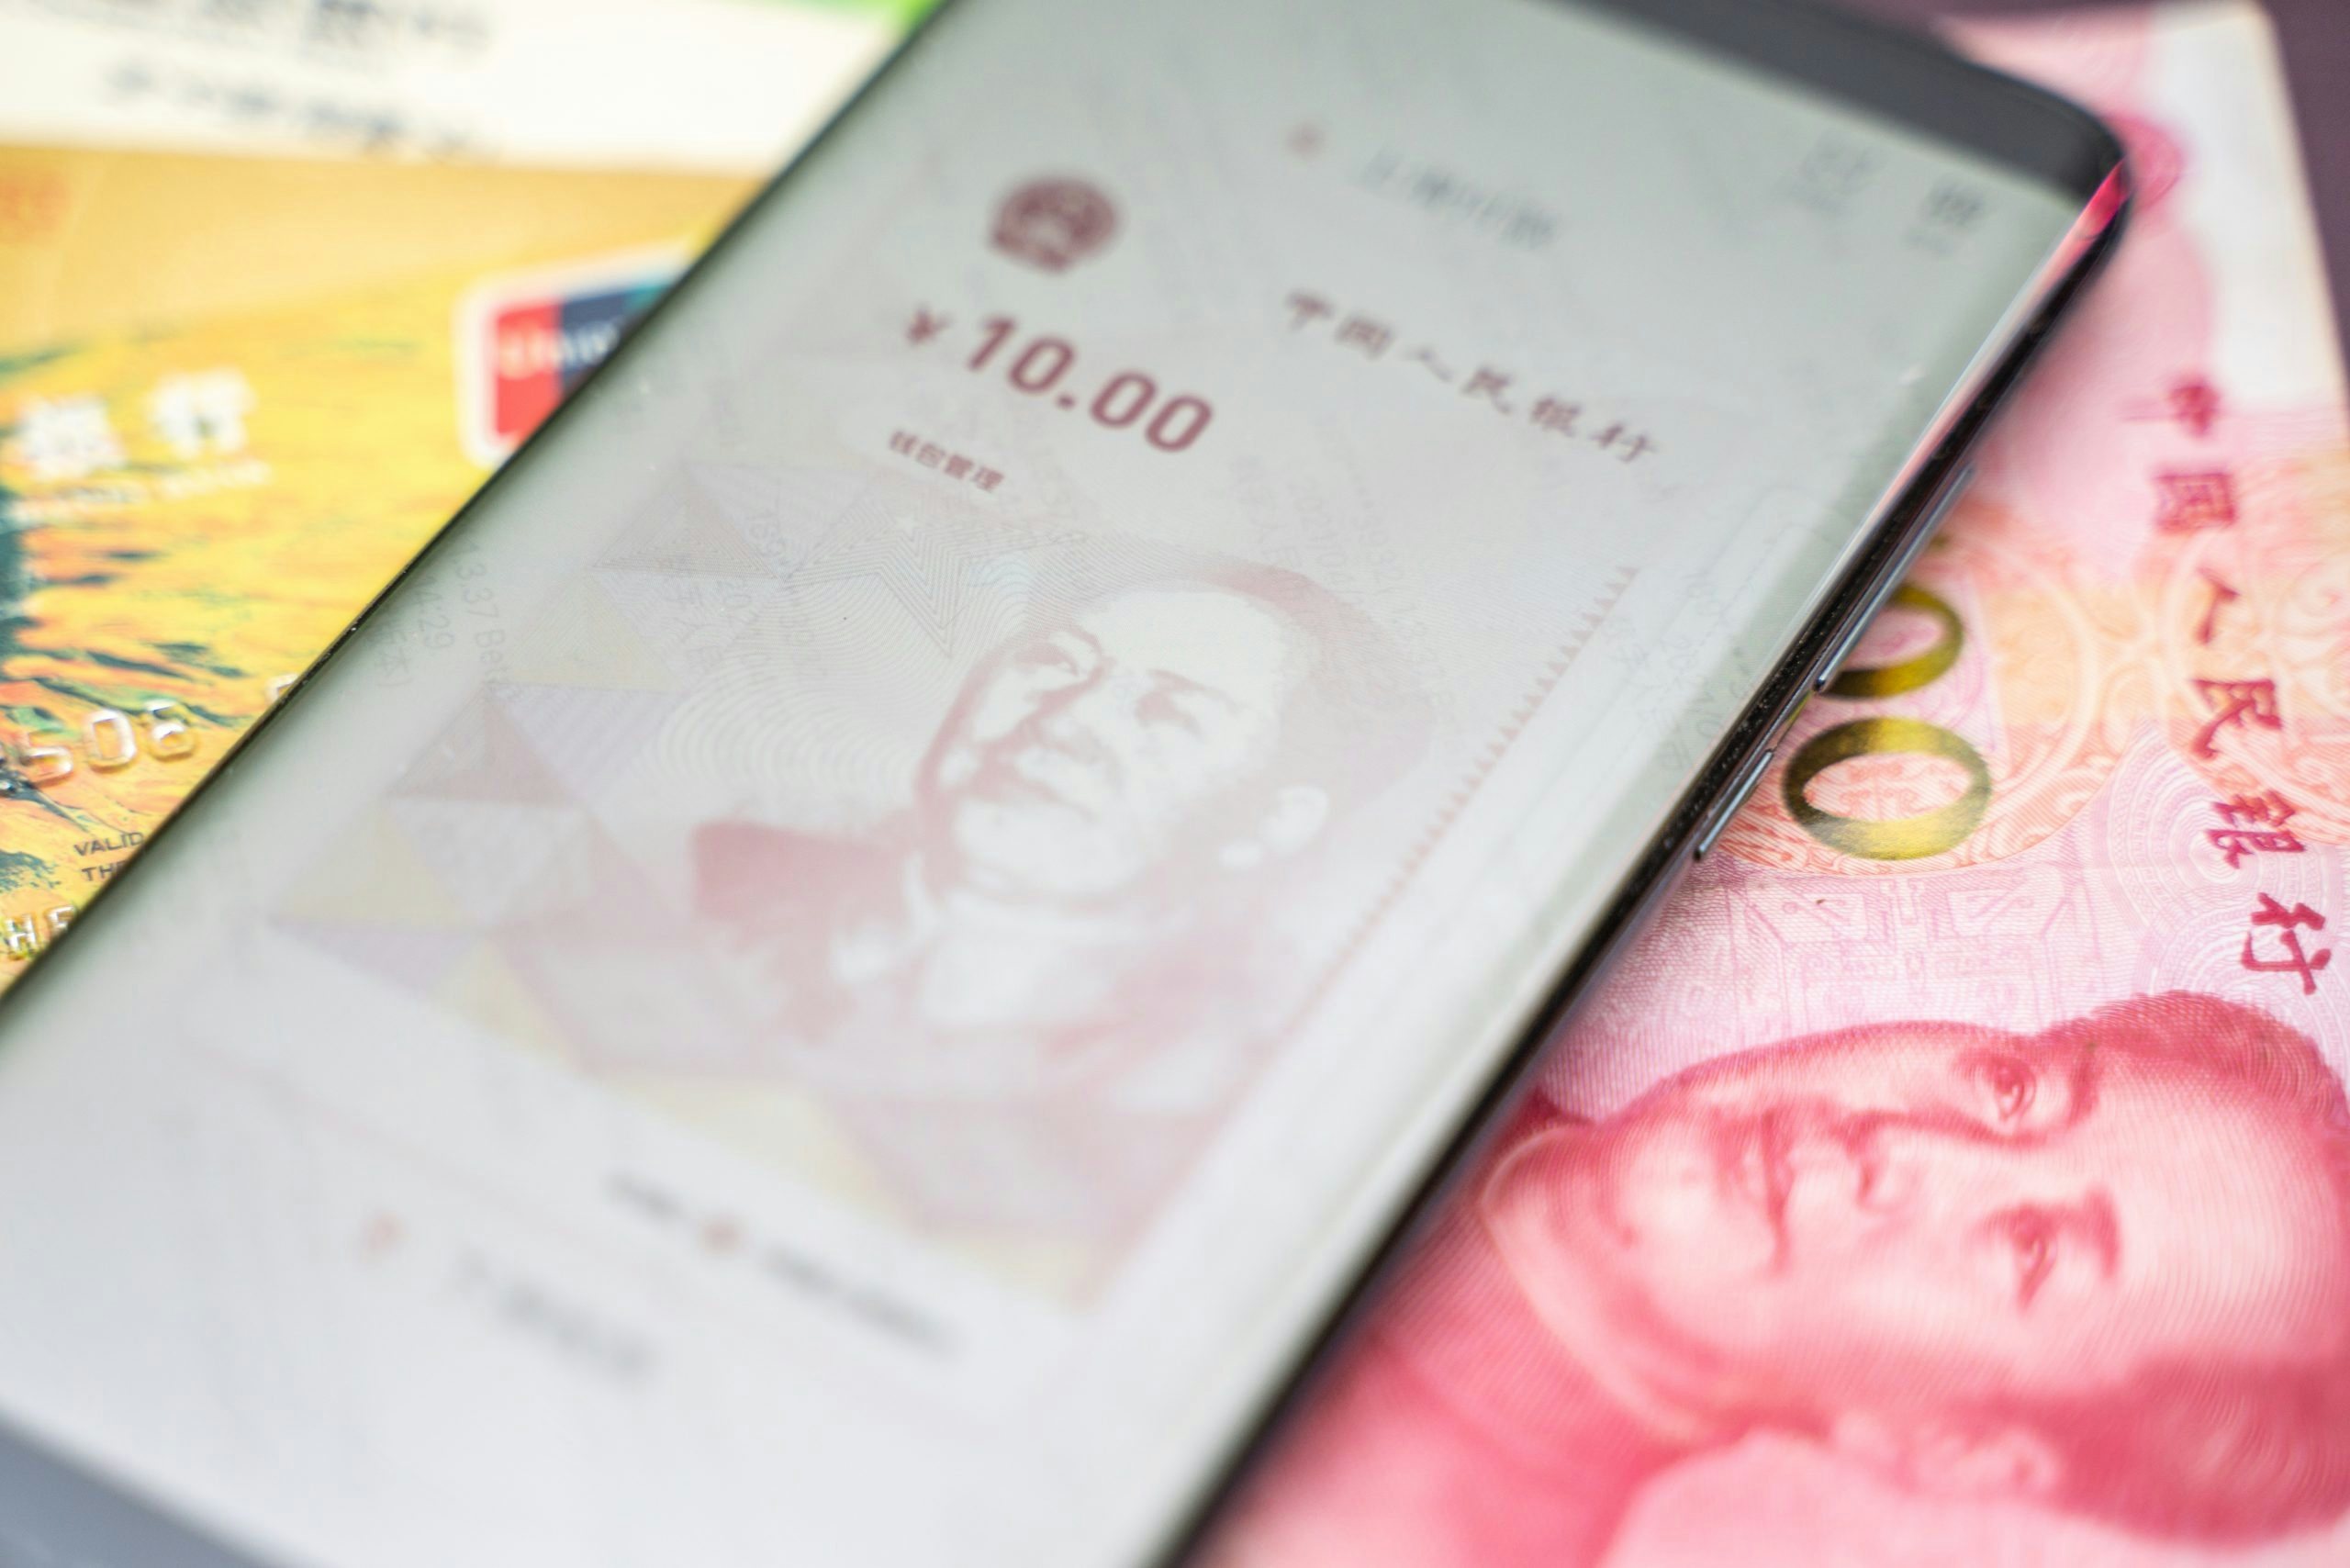 Having banned cryptocurrencies save for its official digital RMB, it is unlikely that decentralized commerce in the western vein will come to China. Image: Shutterstock